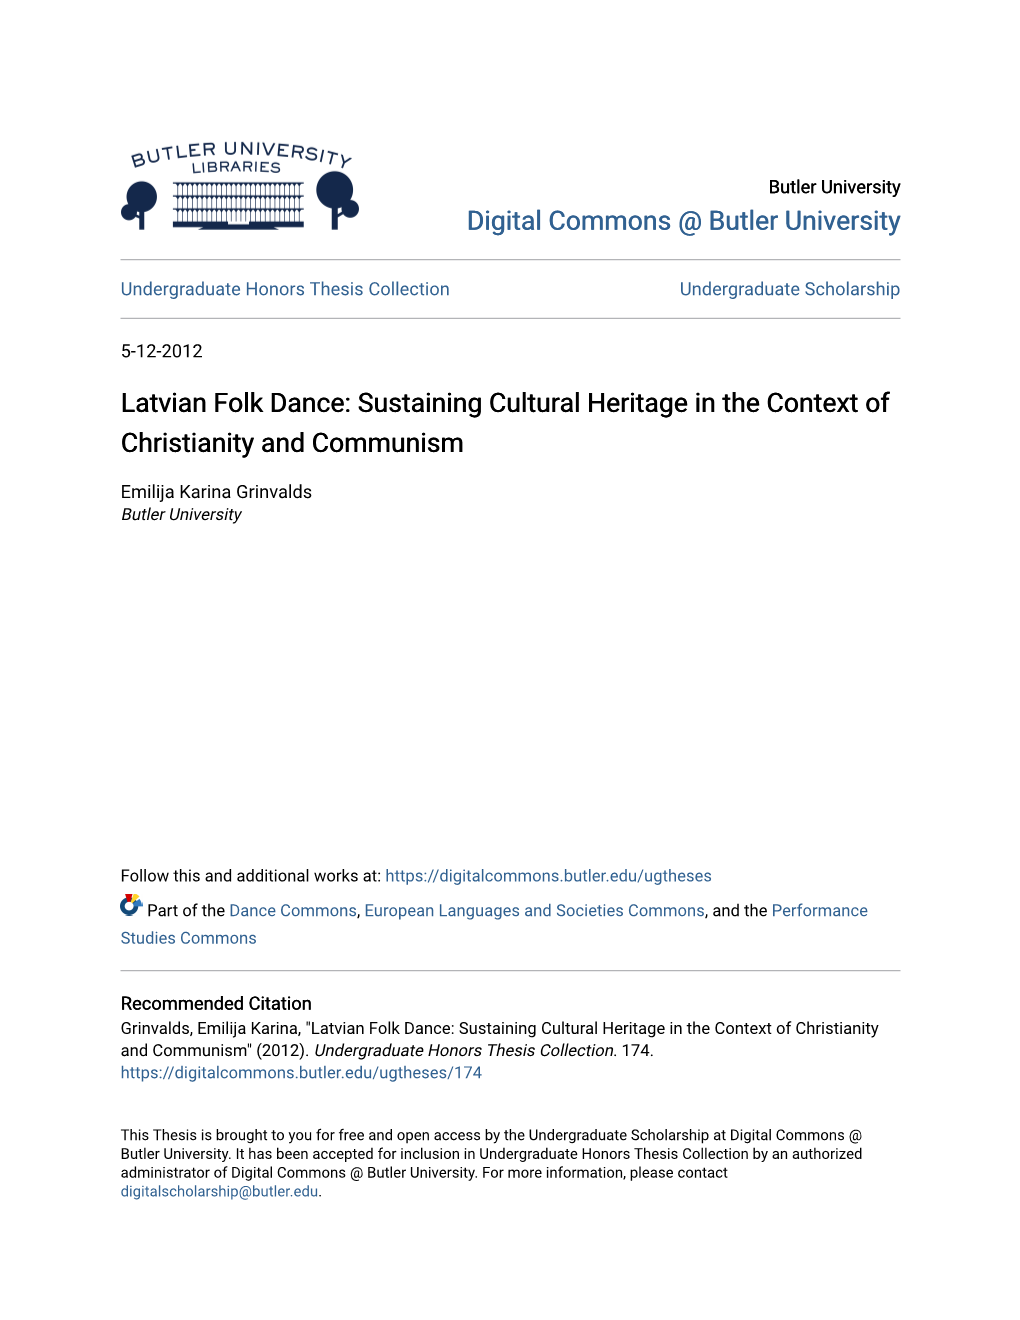 Latvian Folk Dance: Sustaining Cultural Heritage in the Context of Christianity and Communism